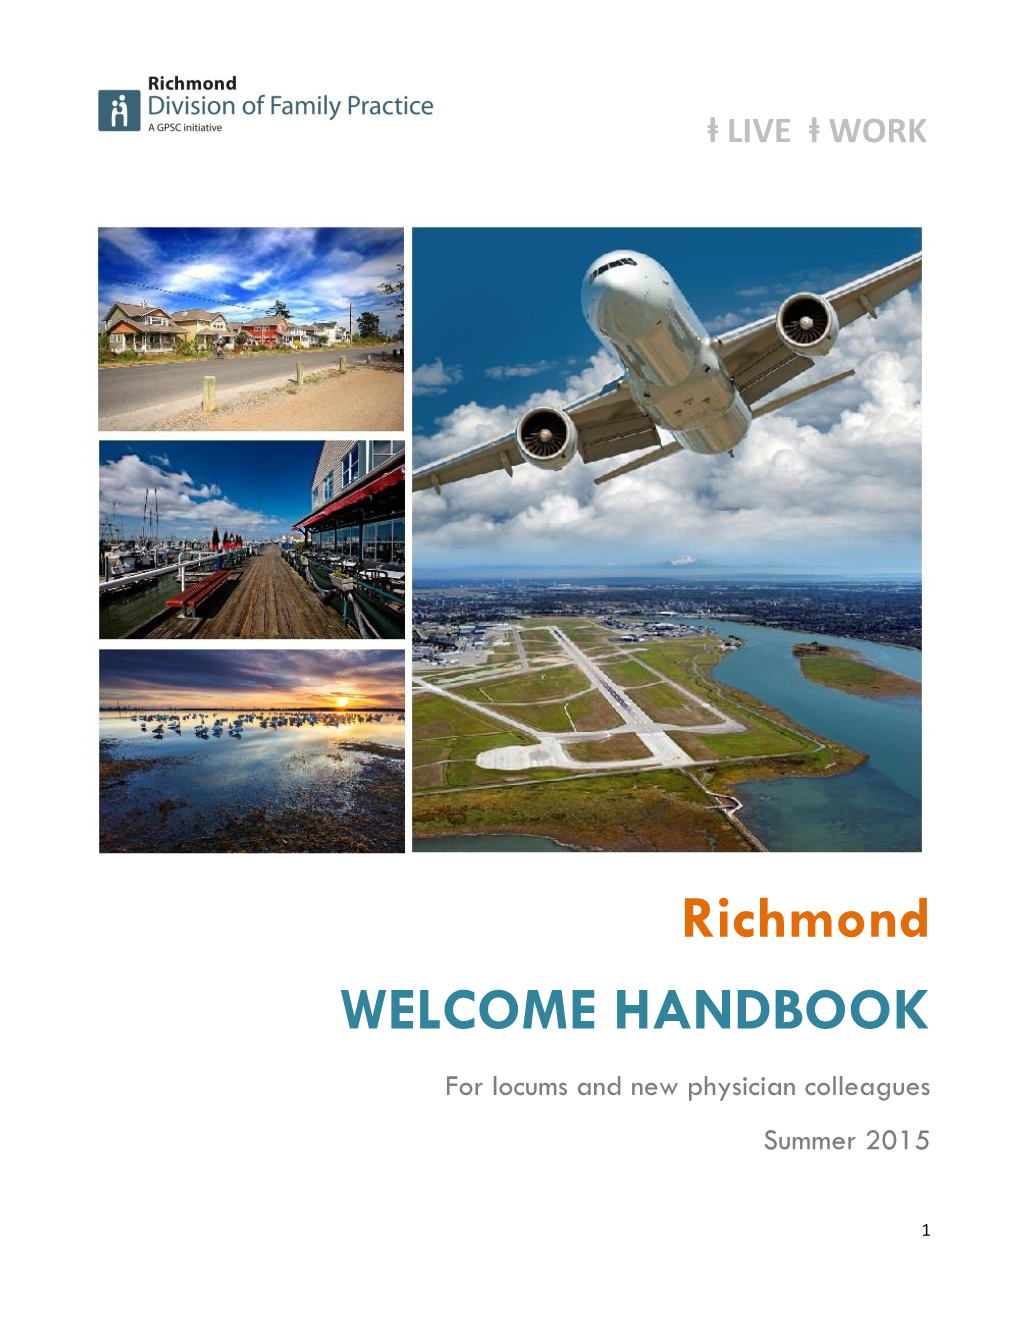 Richmond WELCOME HANDBOOK for Locums and New Physician Colleagues Summer 2015